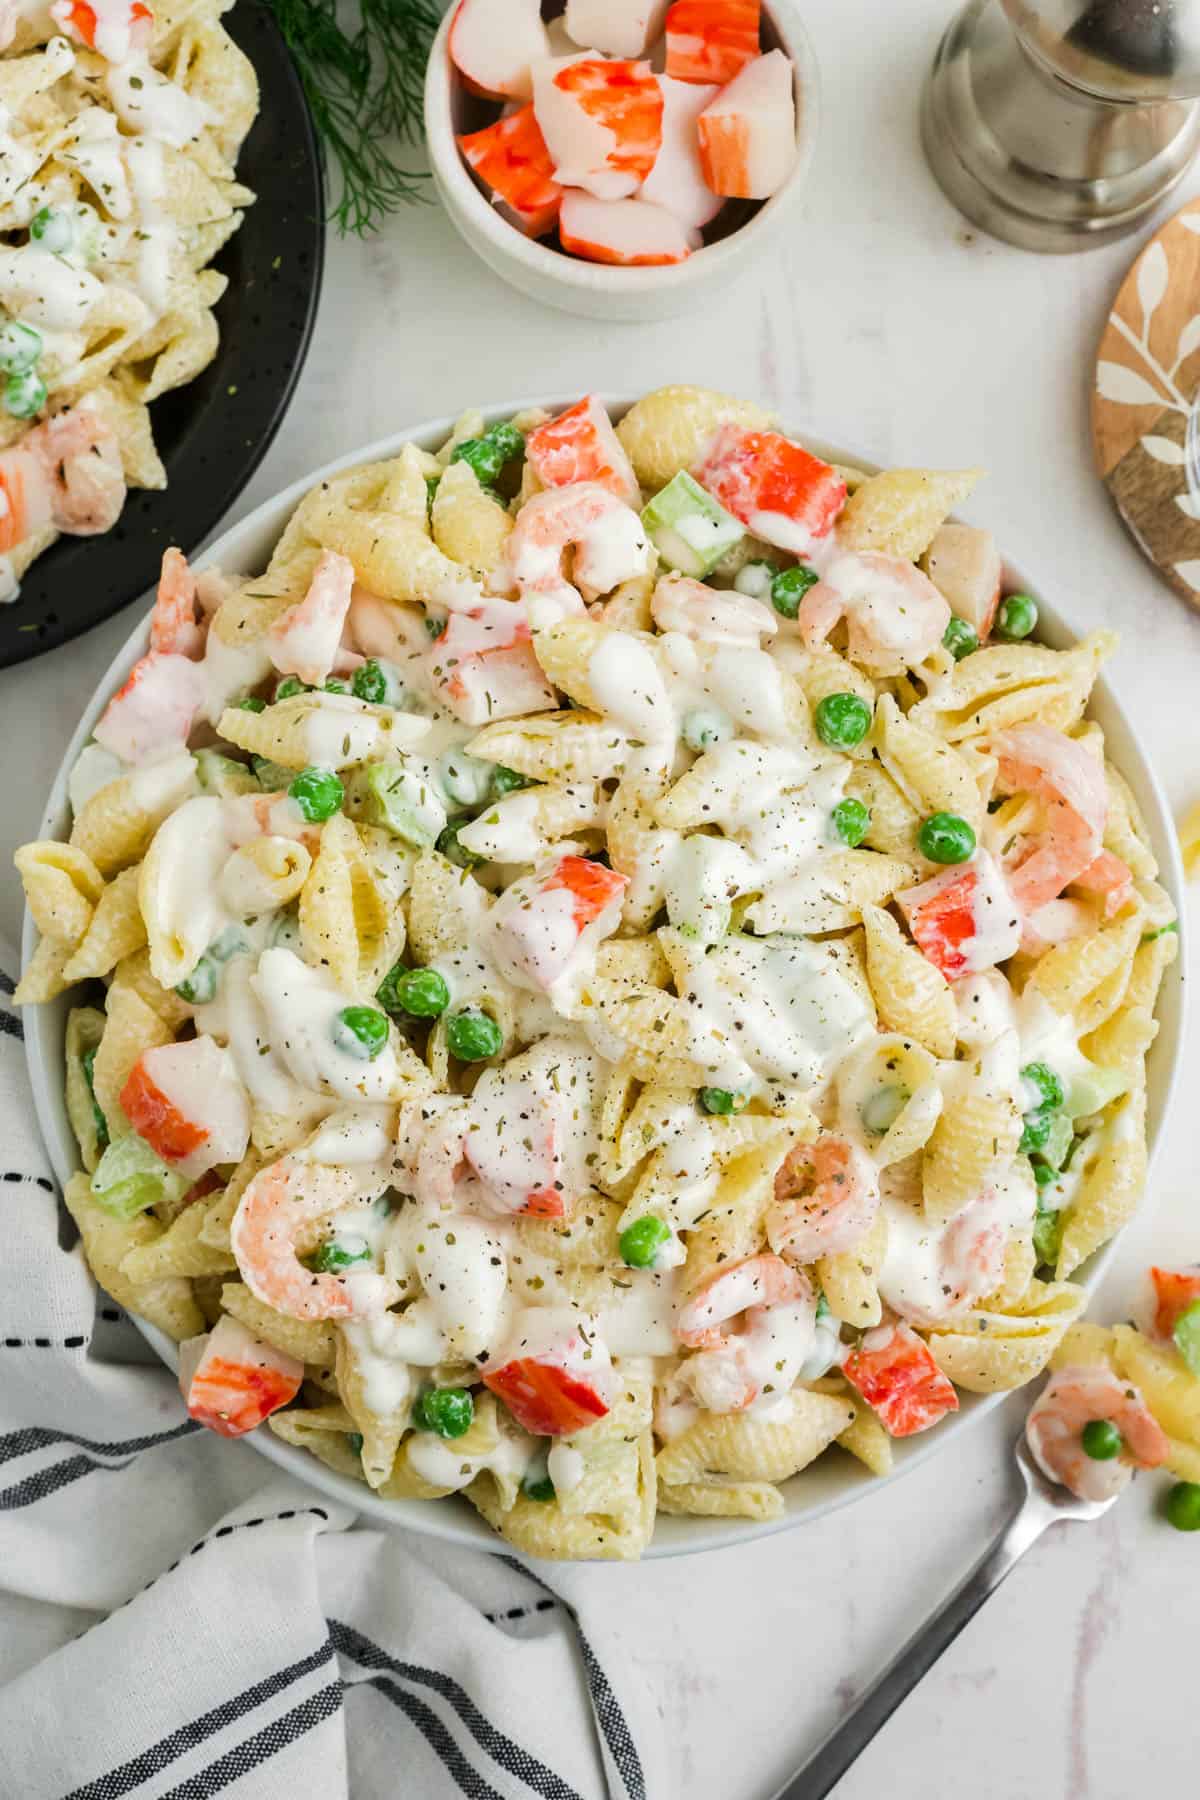 An overhead image of pasta salad with shells and seafood.